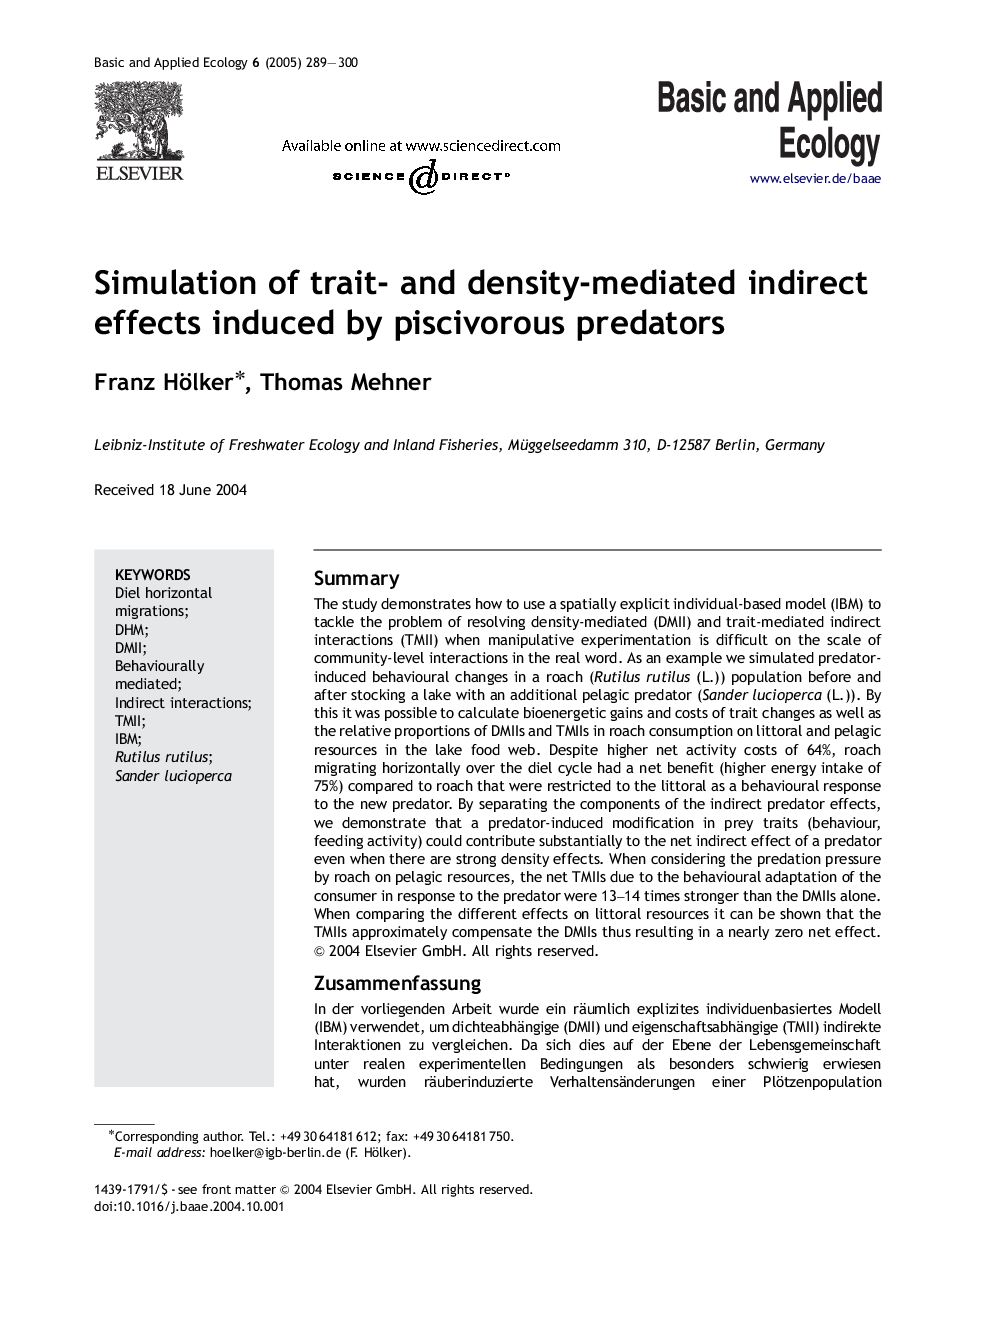 Simulation of trait- and density-mediated indirect effects induced by piscivorous predators